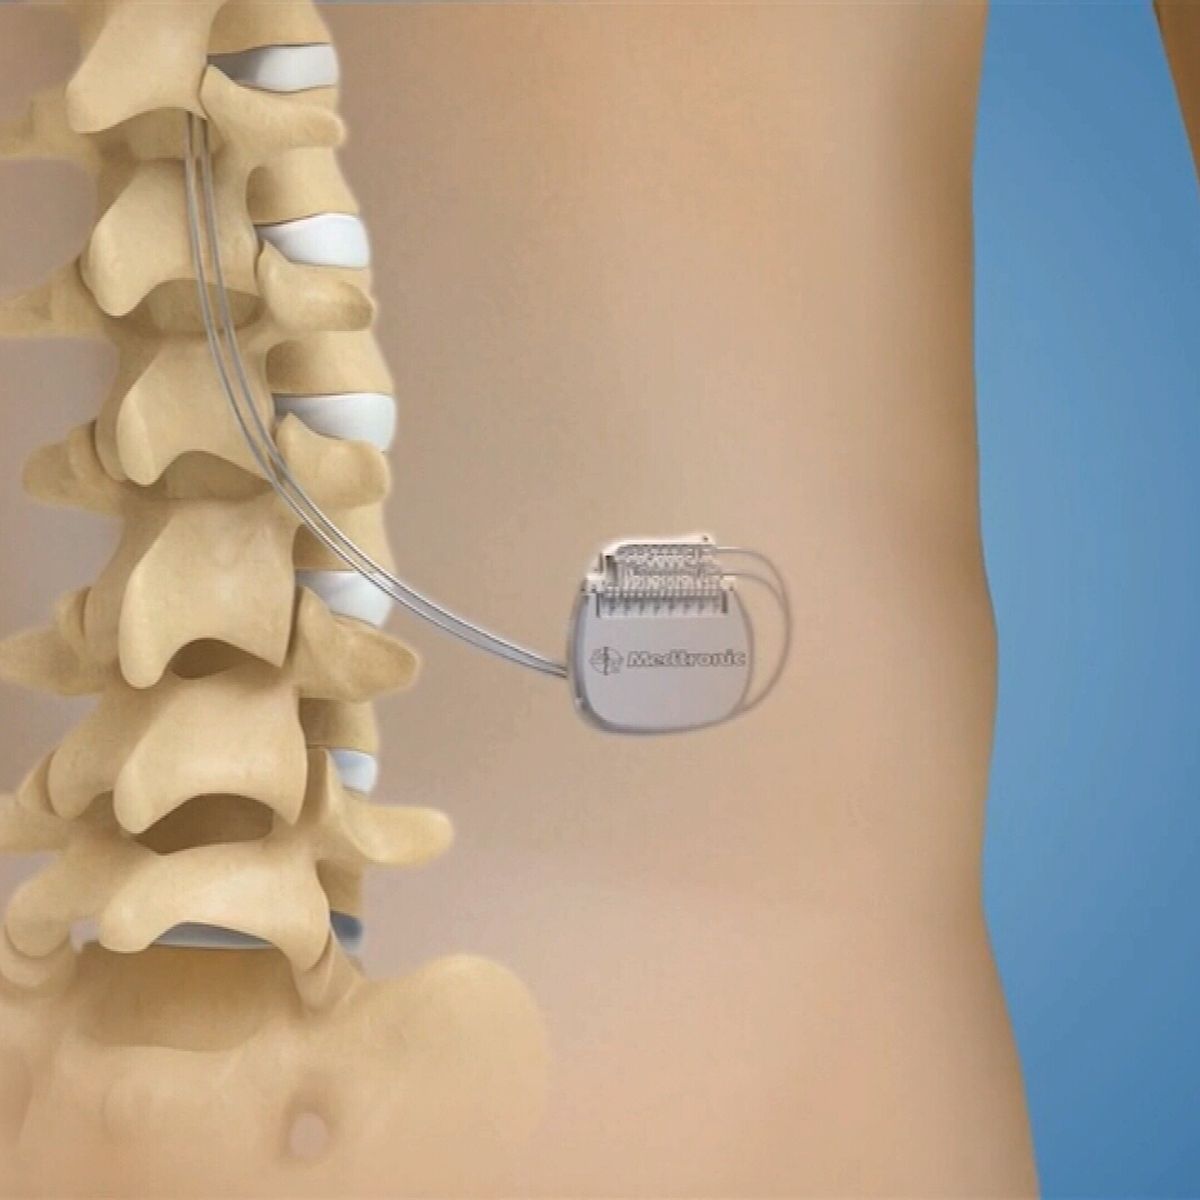 Chronic back pain now being treated with world's smallest battery